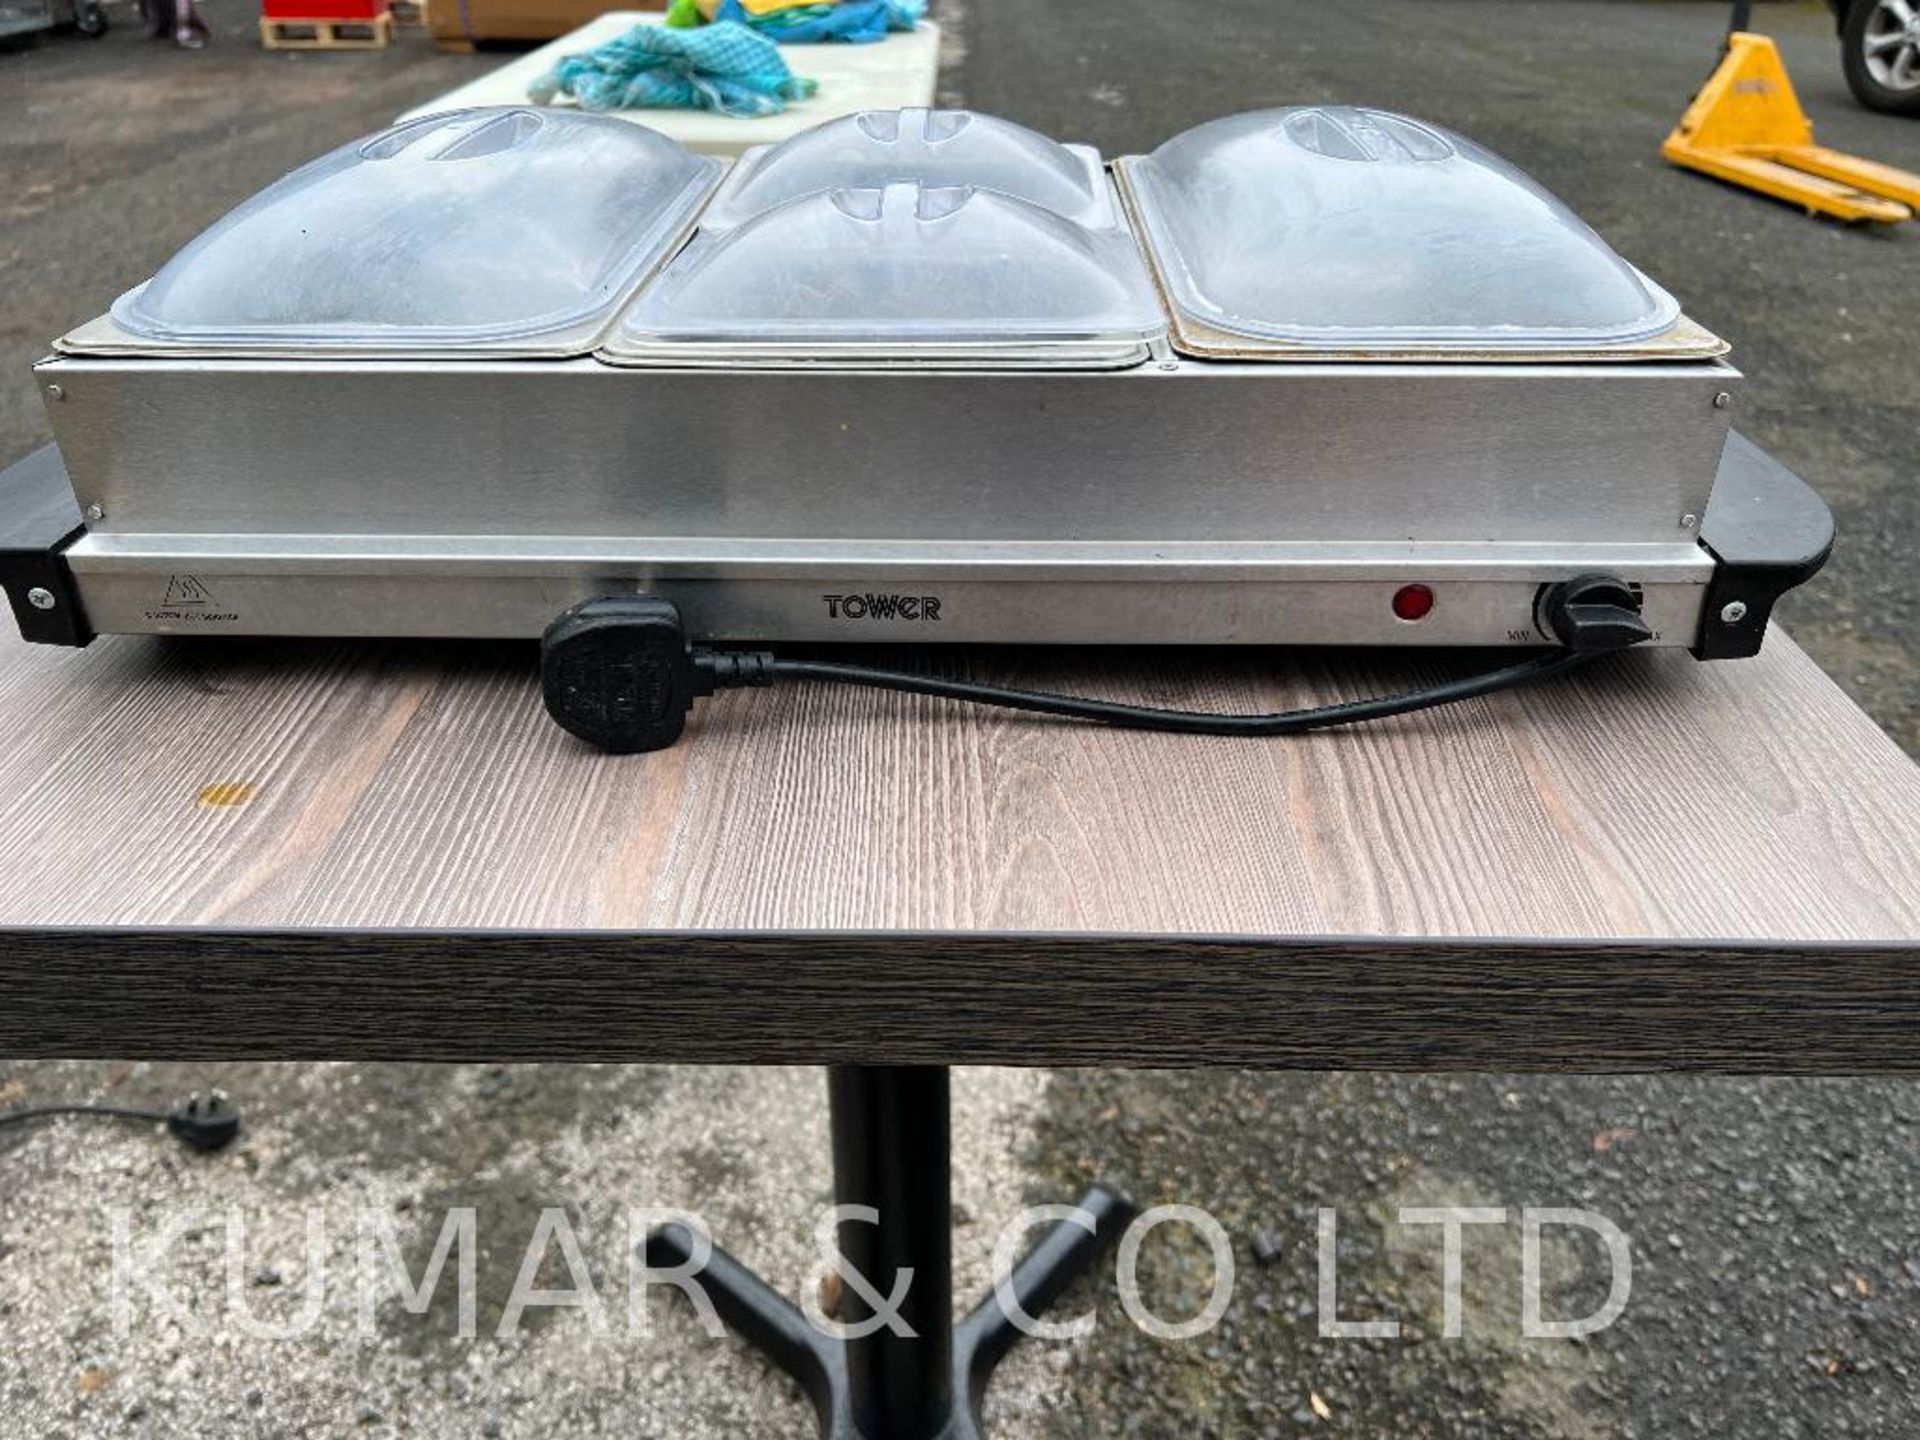 Tower Stainless Steel 4 Tray Buffet Server with 230v UK Domestic Plug. Model No: 350633. - Image 2 of 6